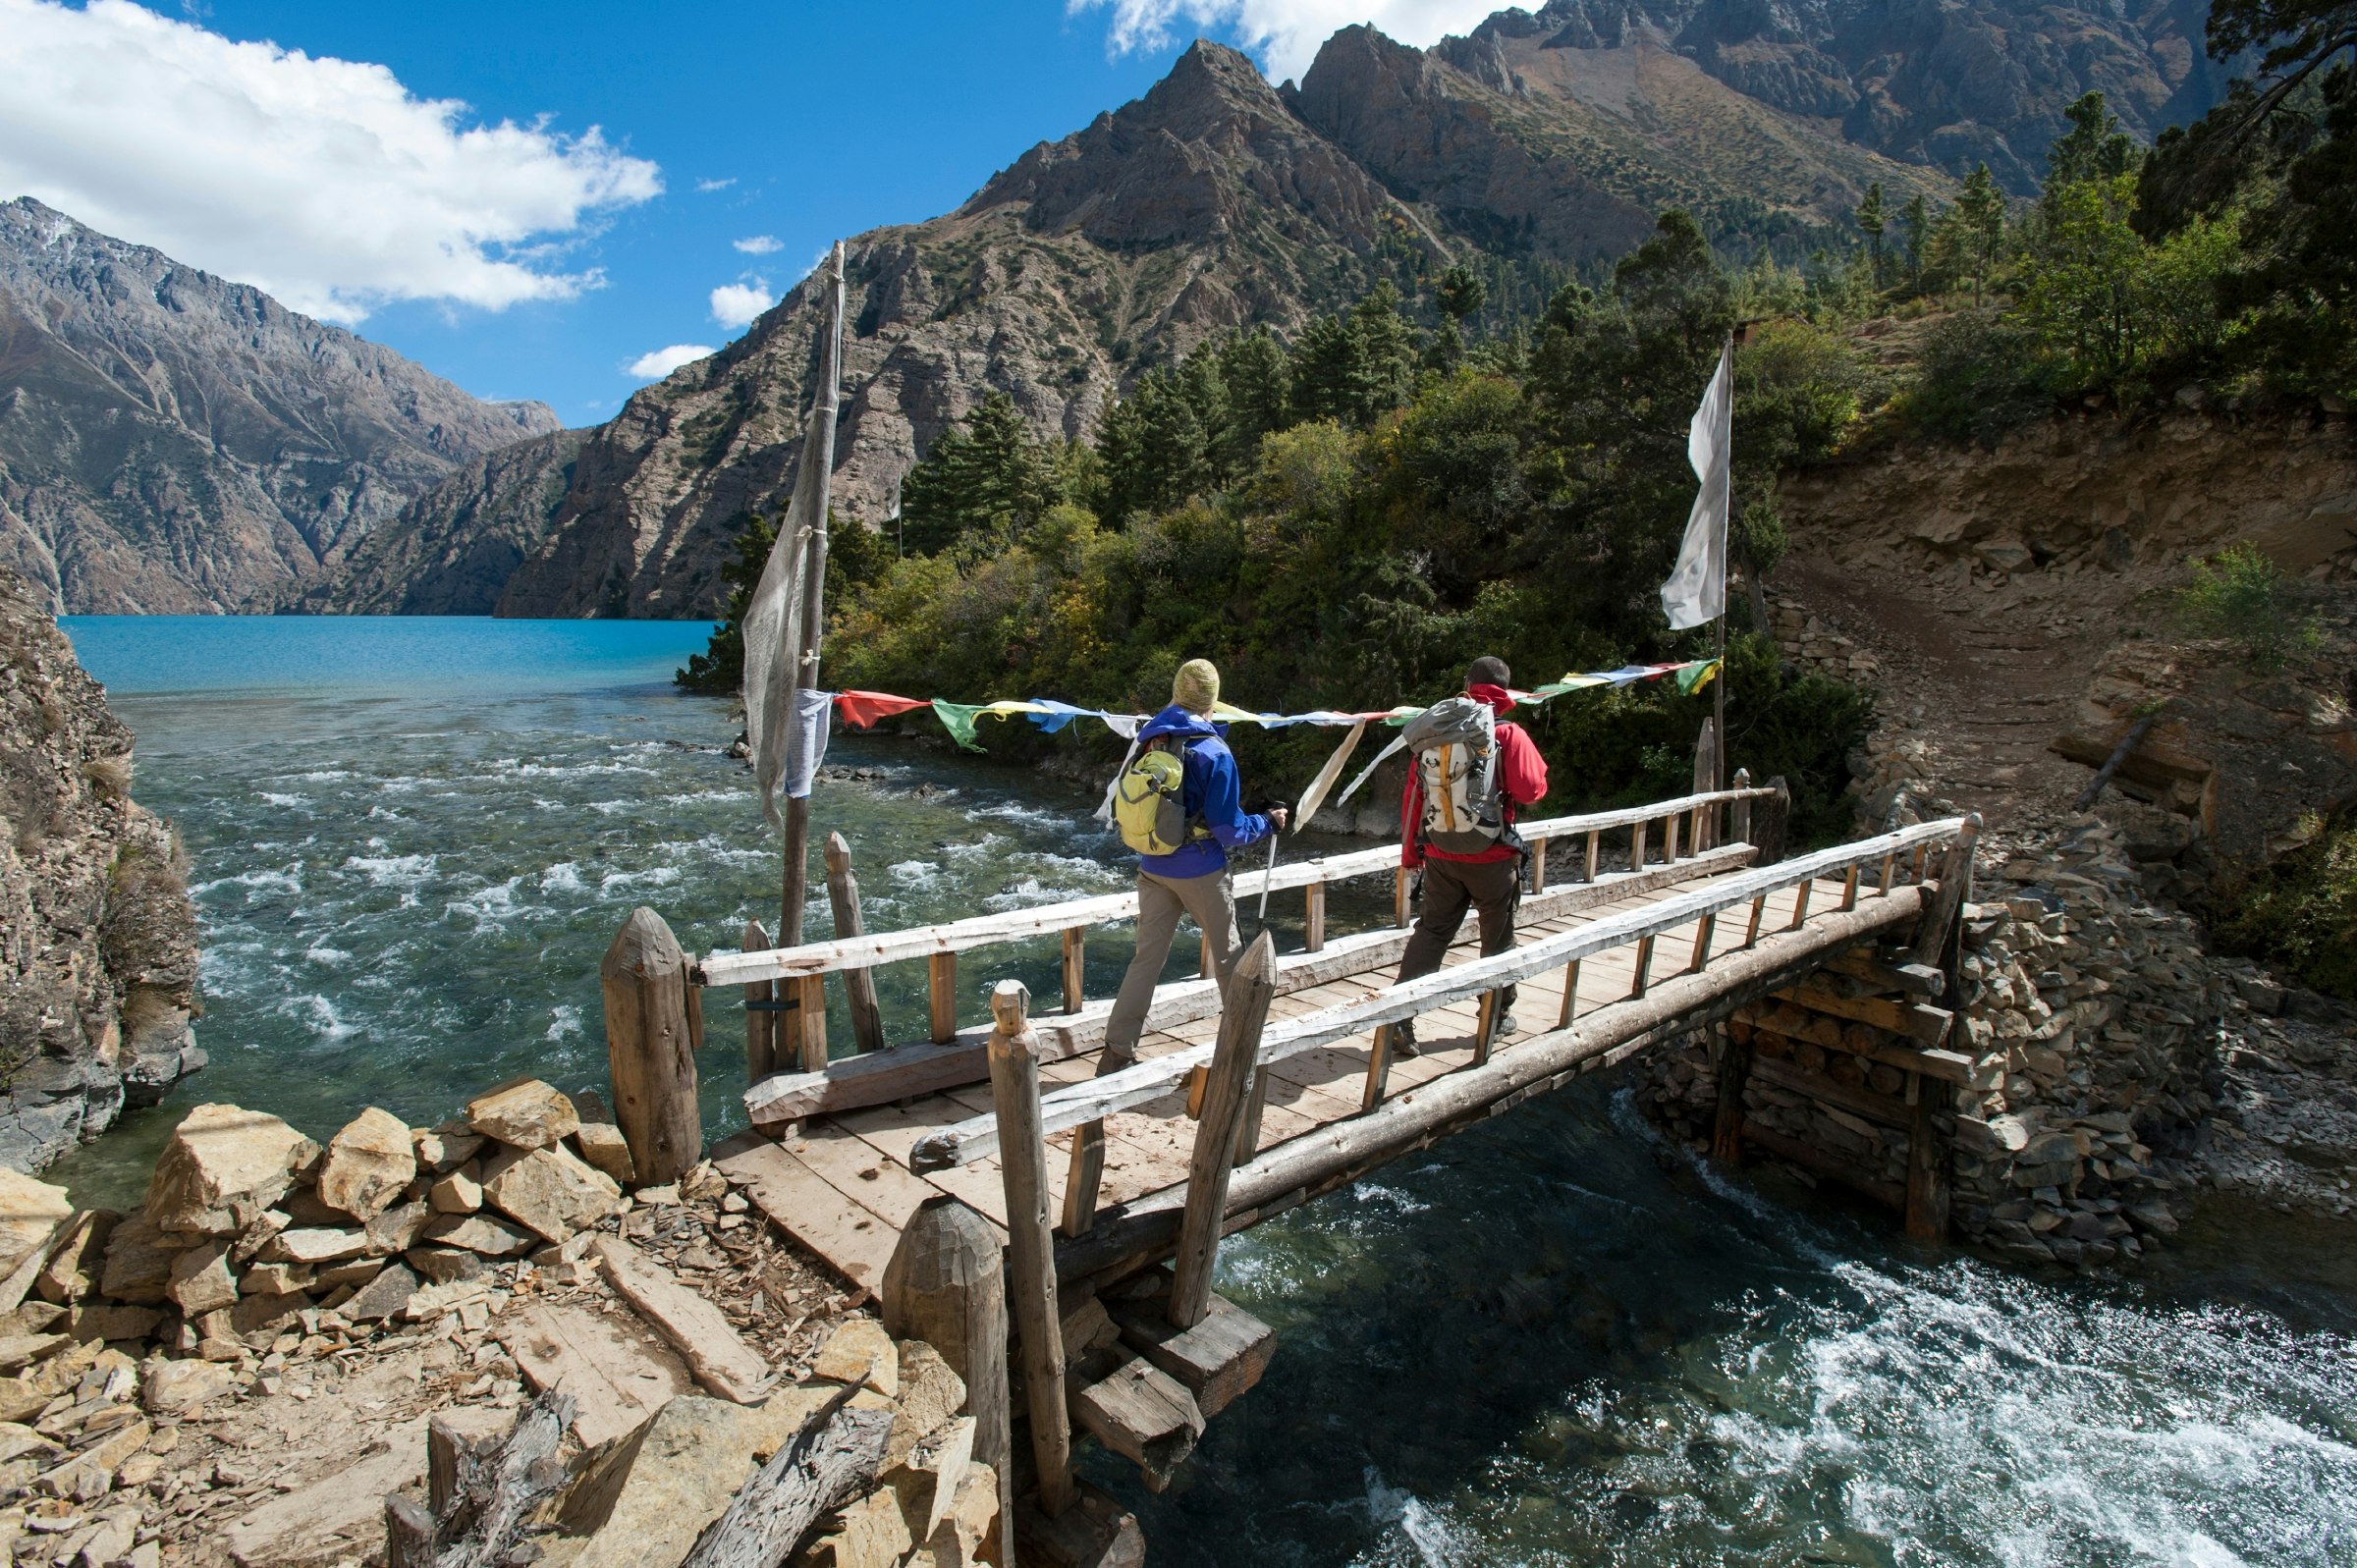 A couple of hikers admire the spectacular blue of Phoksundo lake while crossing a bridge in Dolpa, a remote region of Nepal